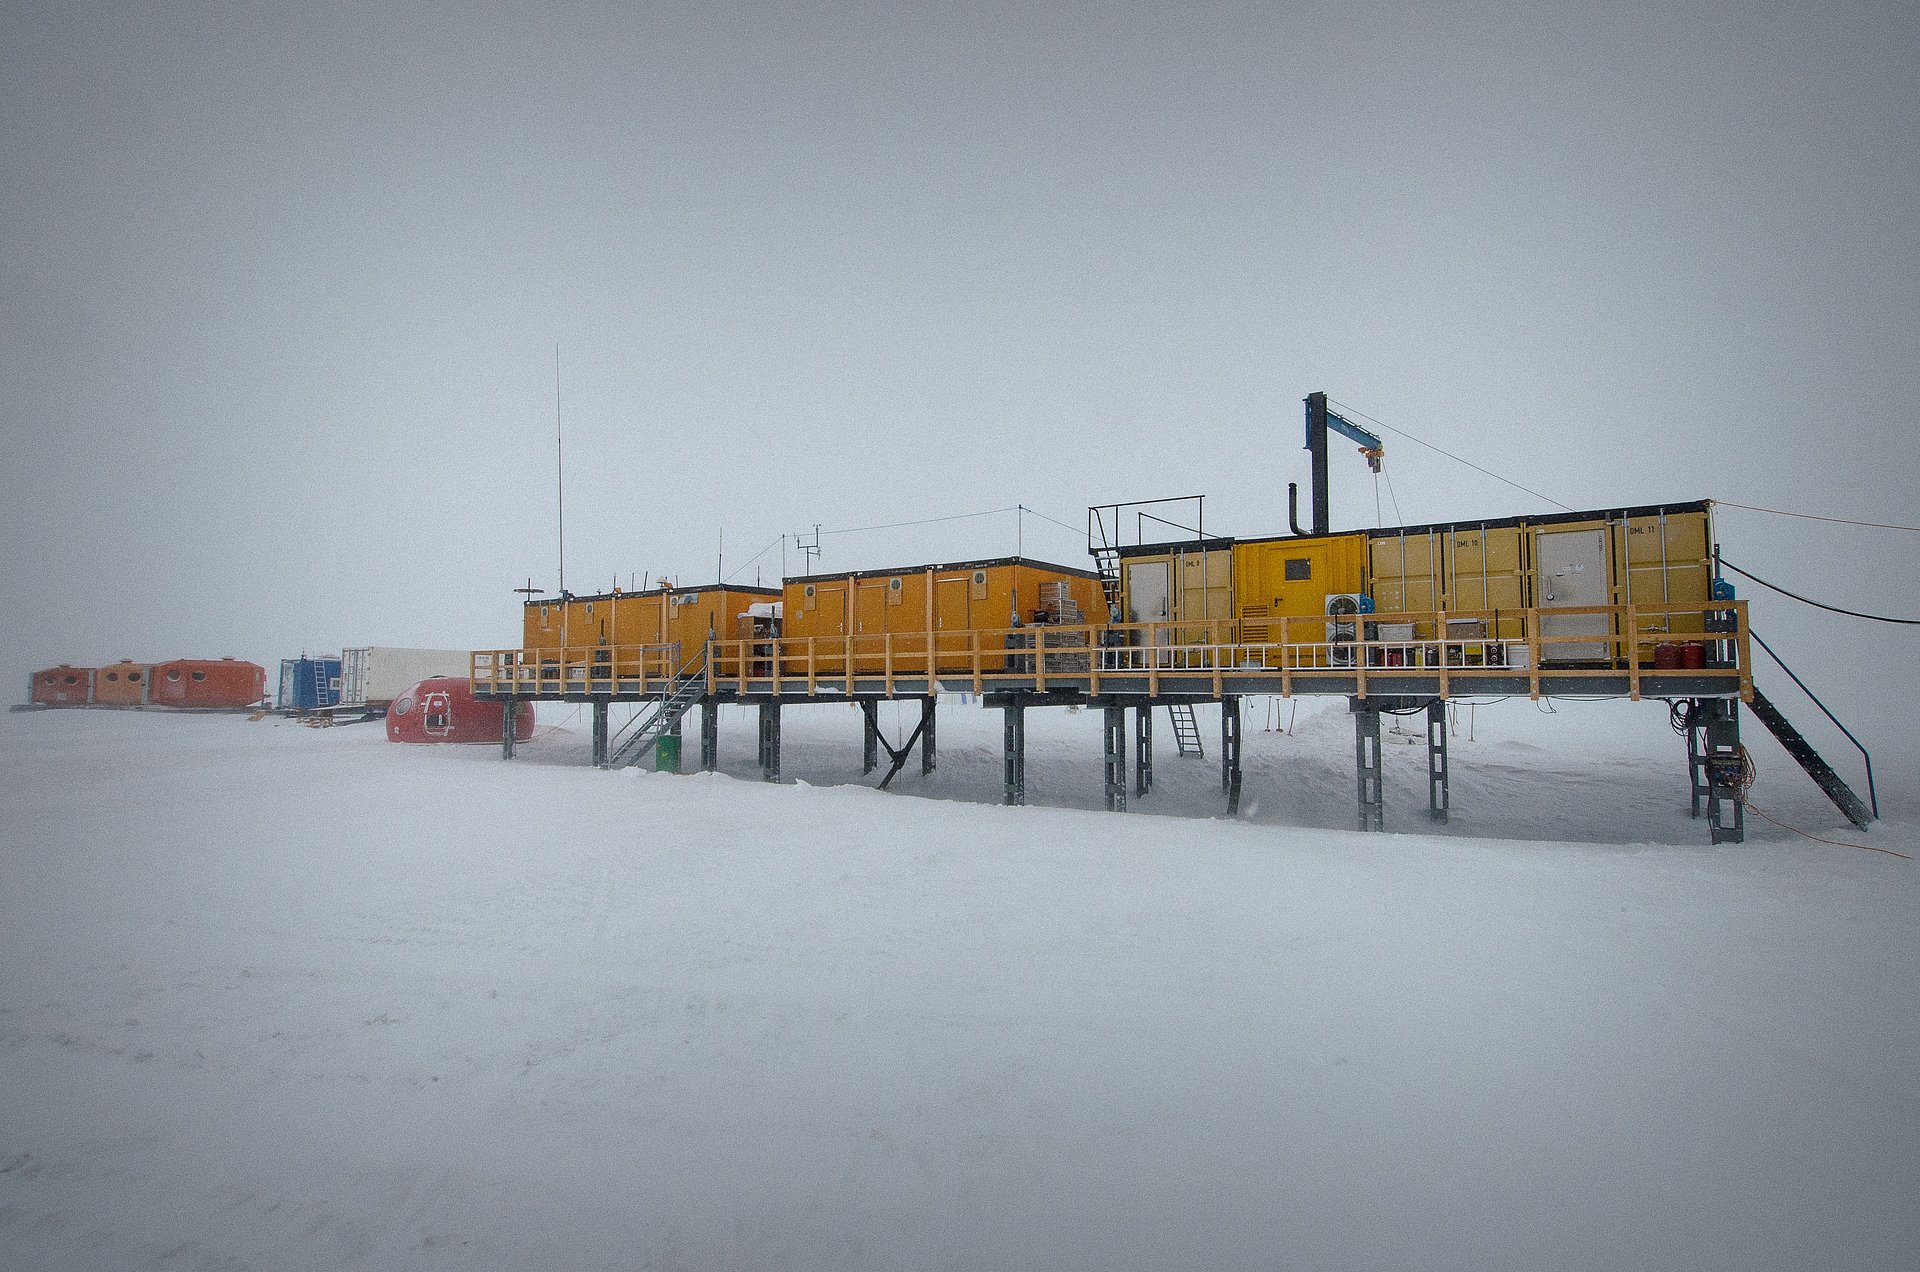 The Kohnen Station is a container settlement in the Antarctic, from whose vicinity the snow samples in which iron-60 was found originate.